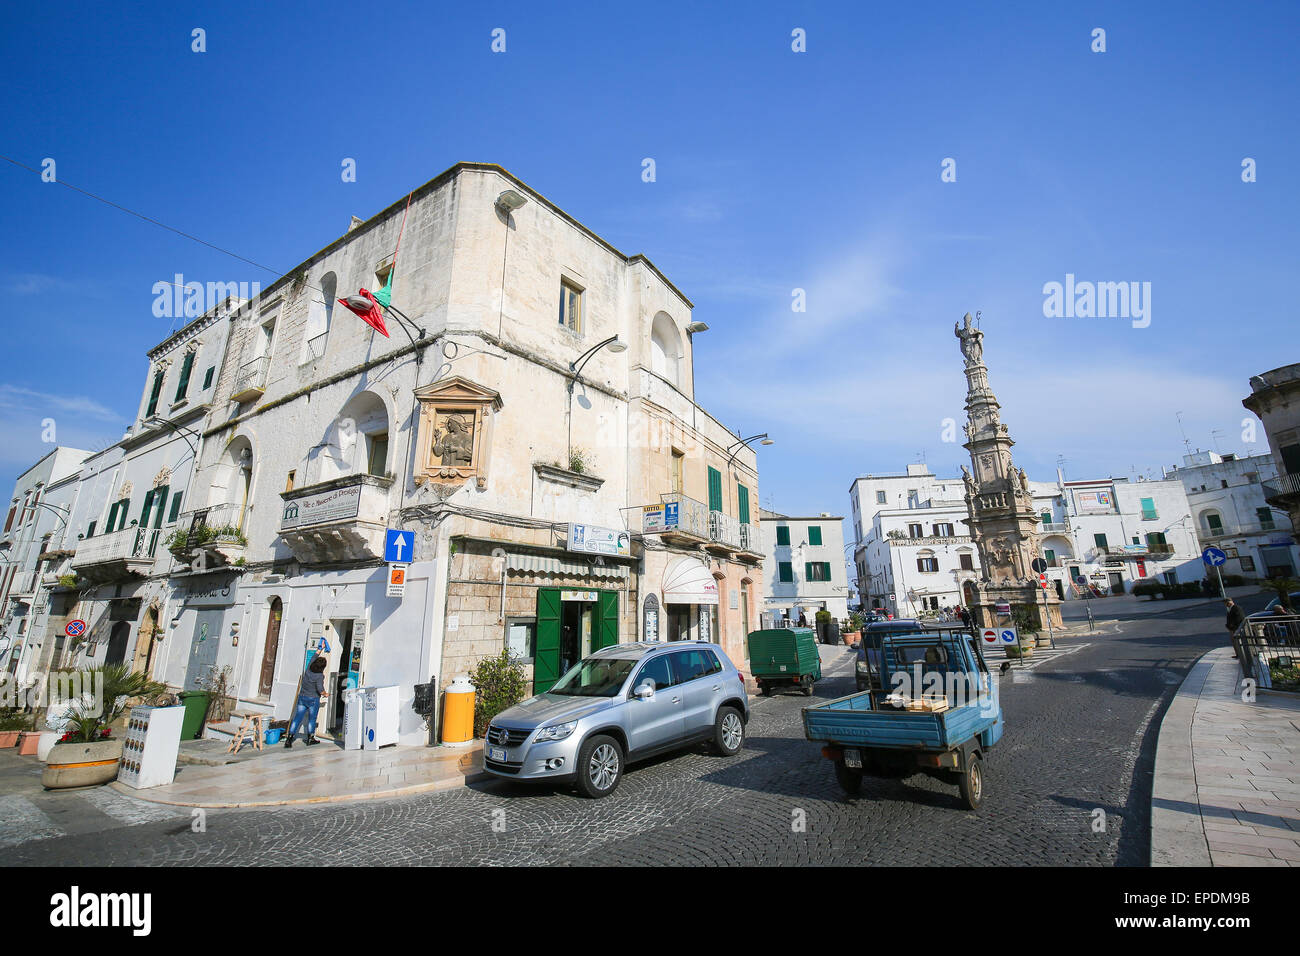 OSTUNI, ITALY - MARCH 14, 2015: Statue of San Oronzo in the center of the medieval town Ostuni, Puglia, Italy. Stock Photo